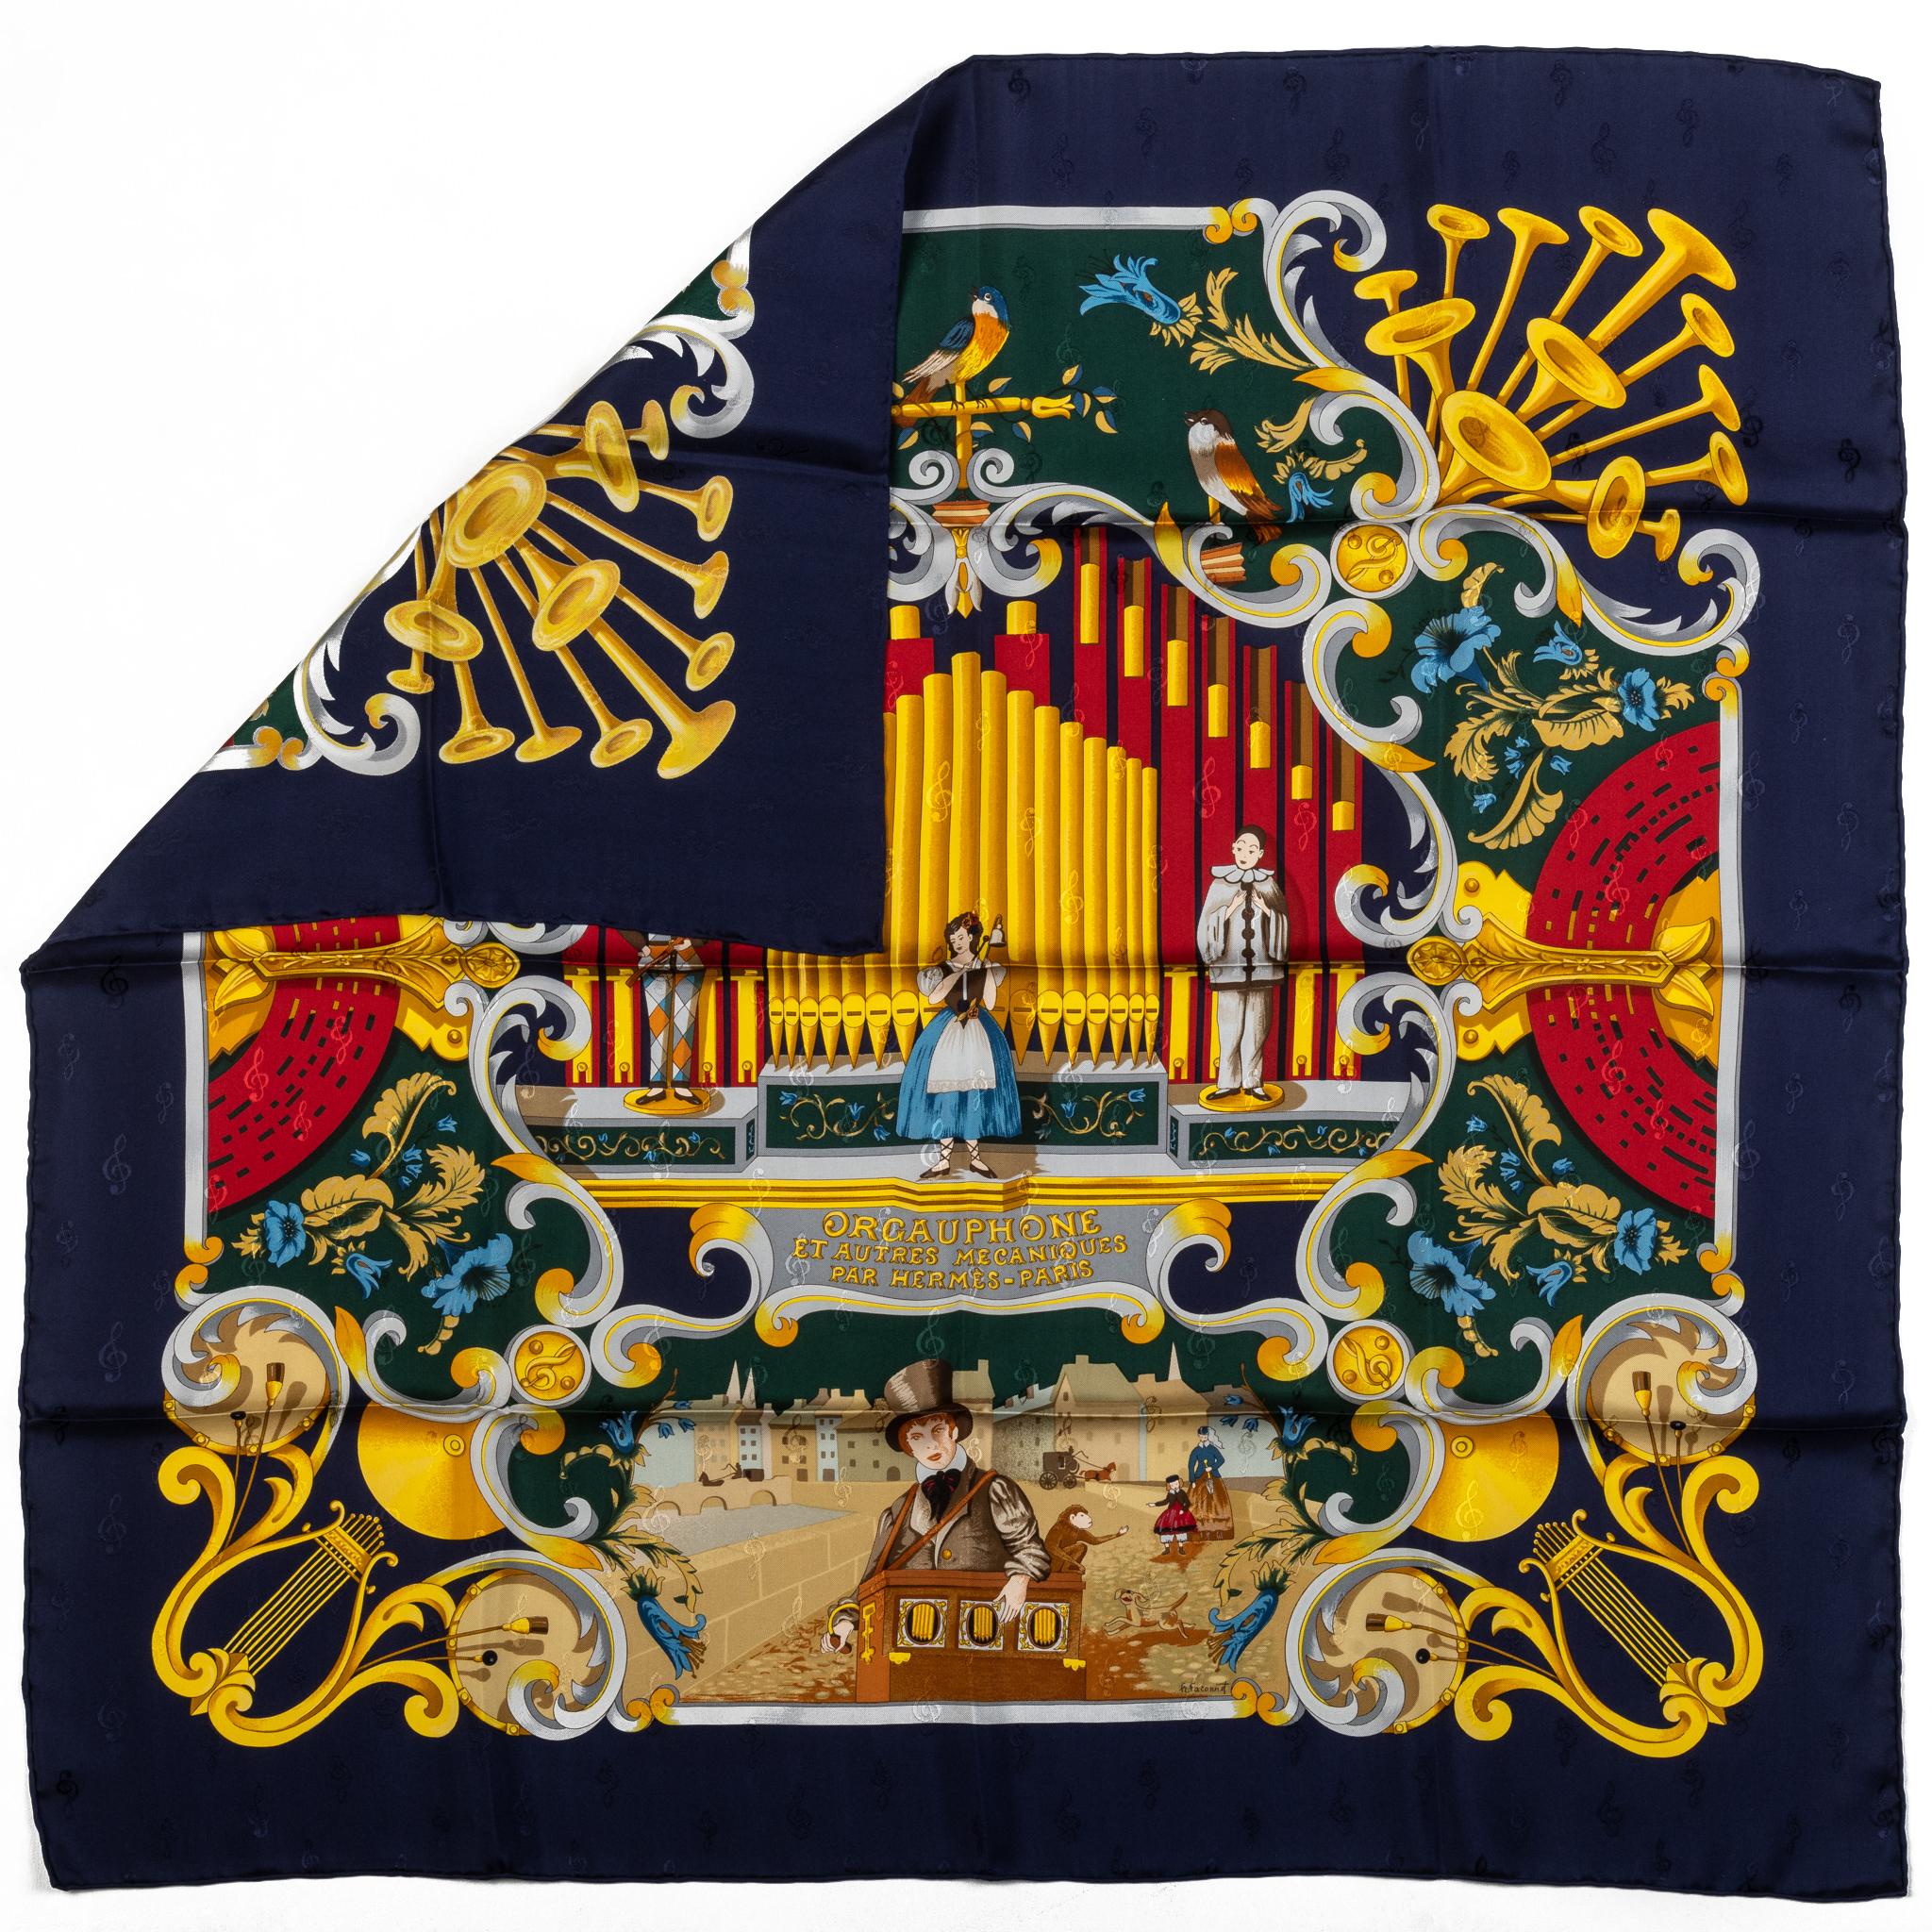 Hermes collectible orgauphone silk scarf in blue and yellow. Hand rolled edges. No box included.